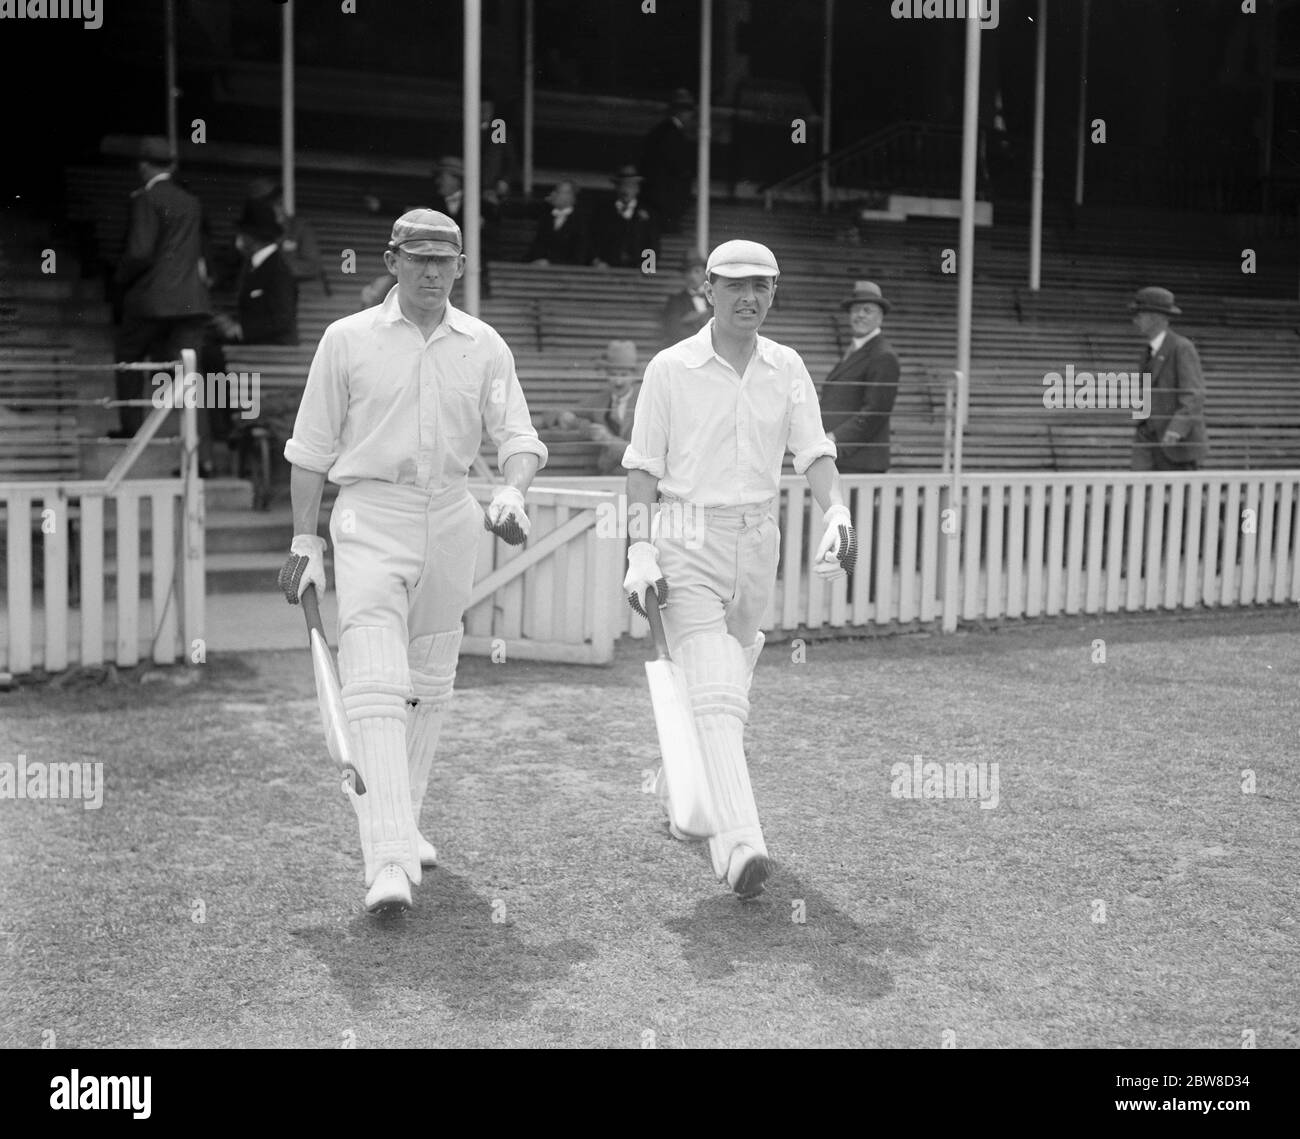 E W Dawson and F J Seabrook coming out to bat . 1926 Stock Photo